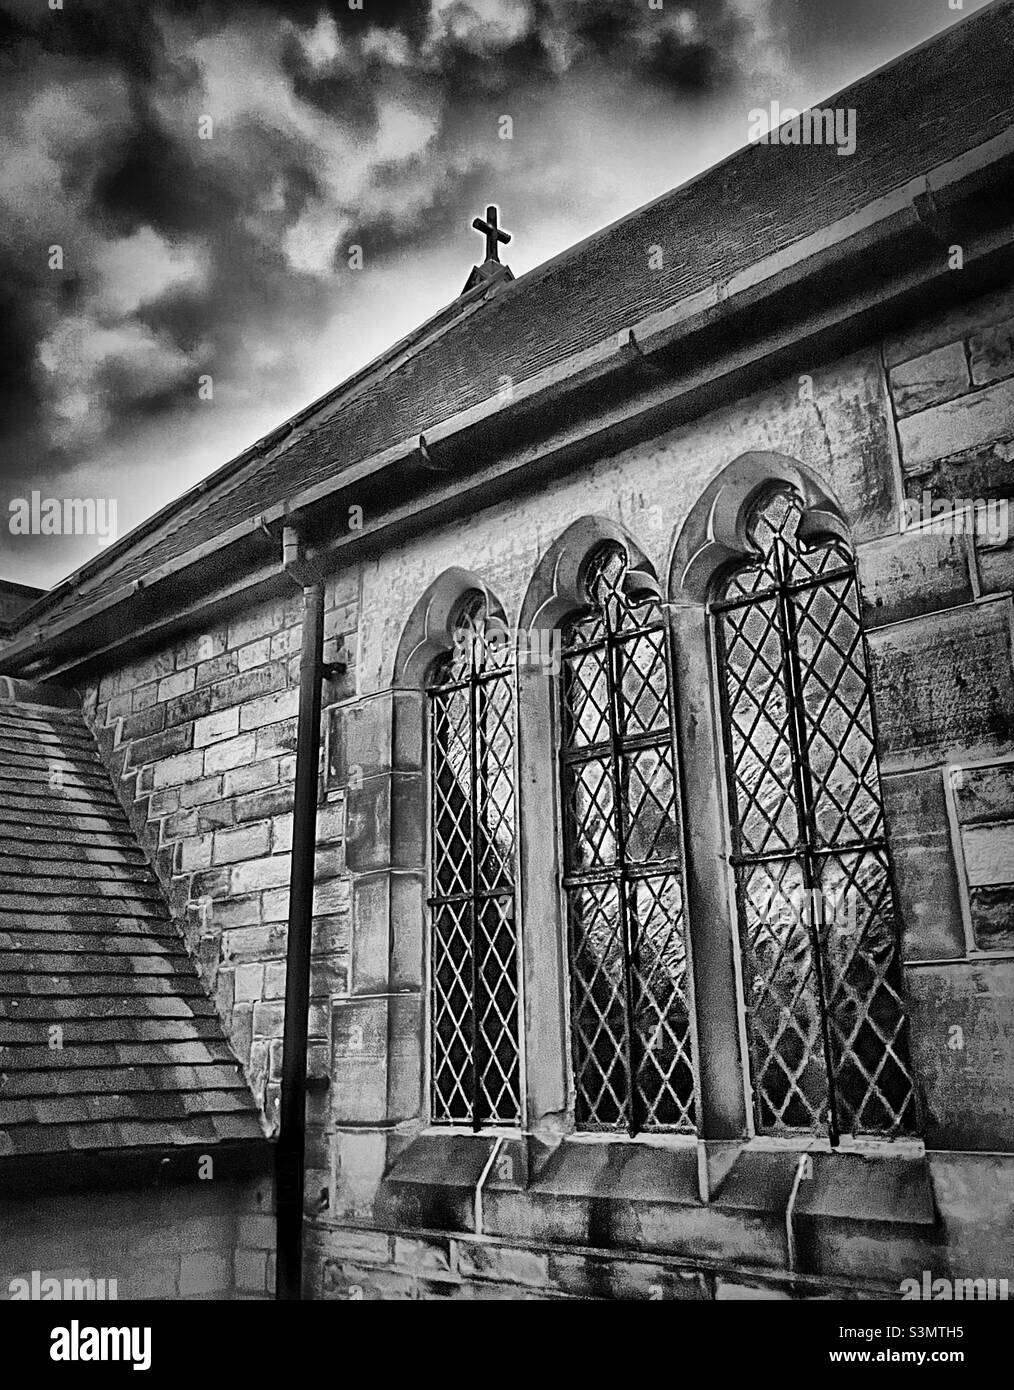 ‘The strength of religion’ a picturesque and quaint village church is juxtaposed by the imminent thunder storm heading its way Stock Photo